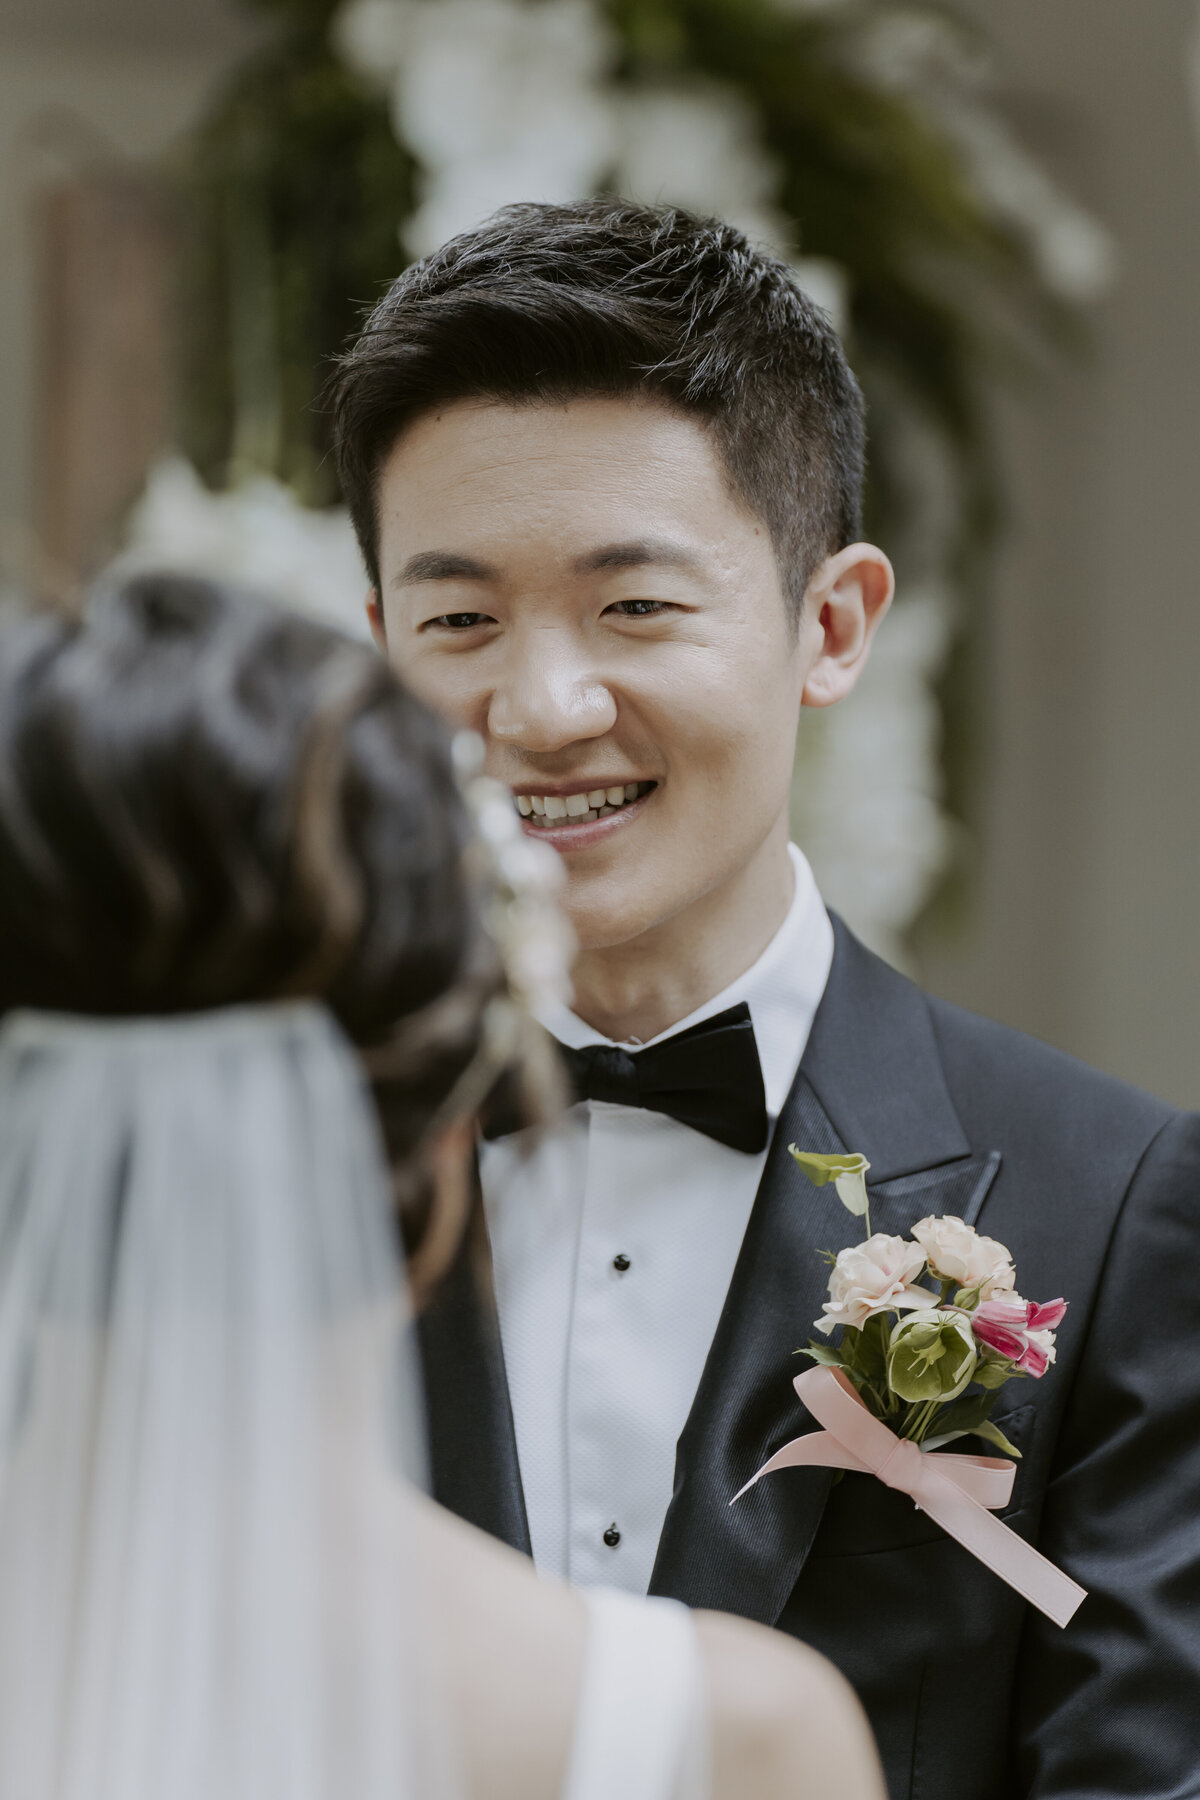 the groom smiling at the bride